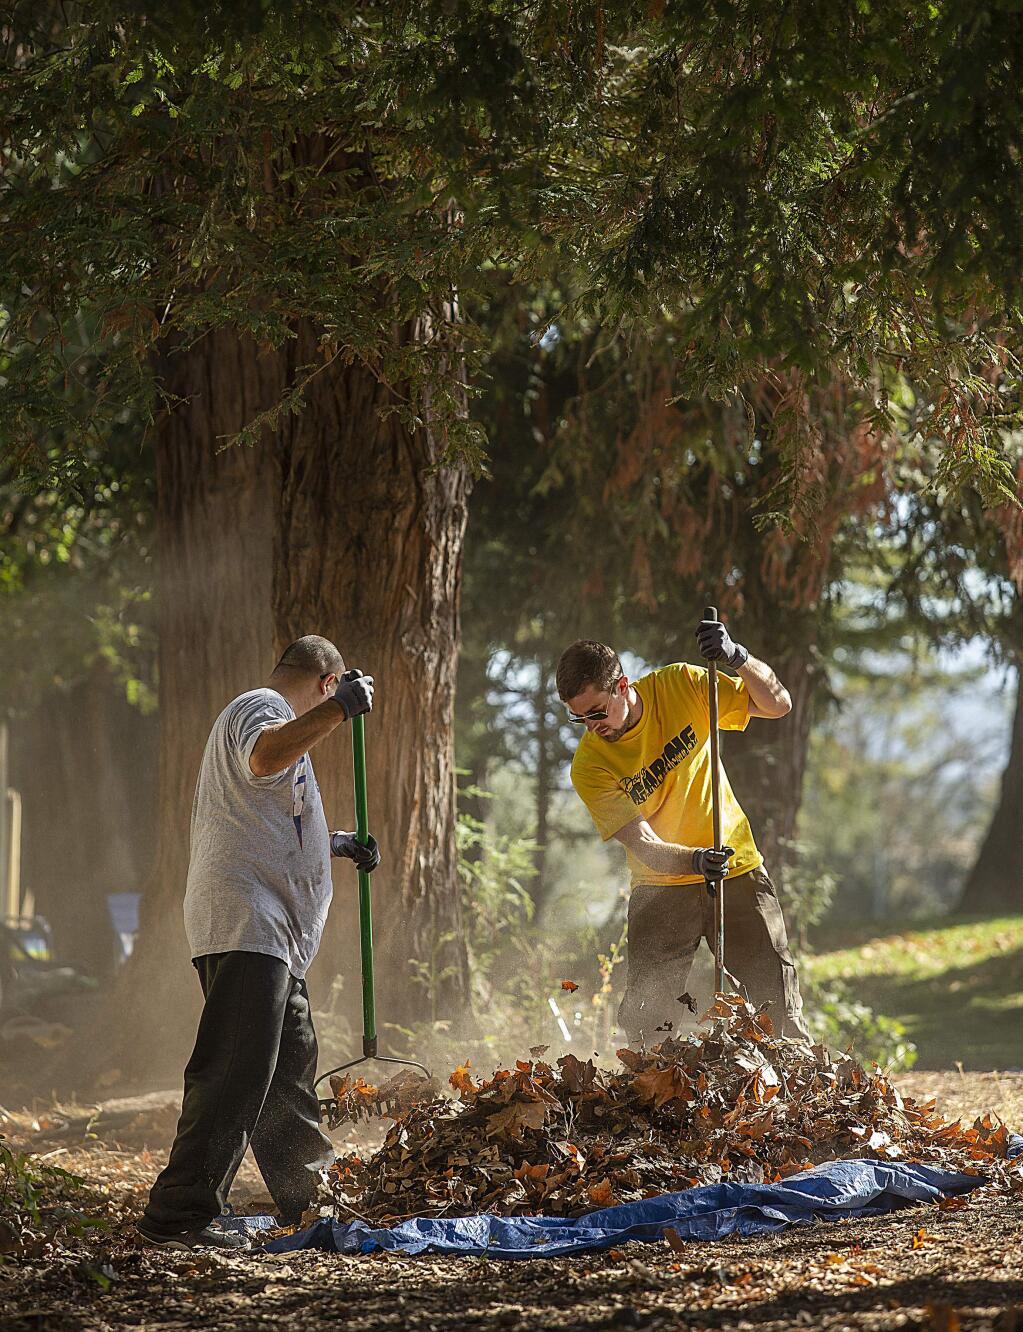 Volunteer and local resident David Magallon, left, joined county employee Fraser Ross in efforts to removes leaves and add mulch at Martin Luther King Jr. park in Santa Rosa on Wednesday. Hundreds of volunteers fanned out across Sonoma County for the annual Day of Caring. (photo by John Burgess/The Press Democrat)